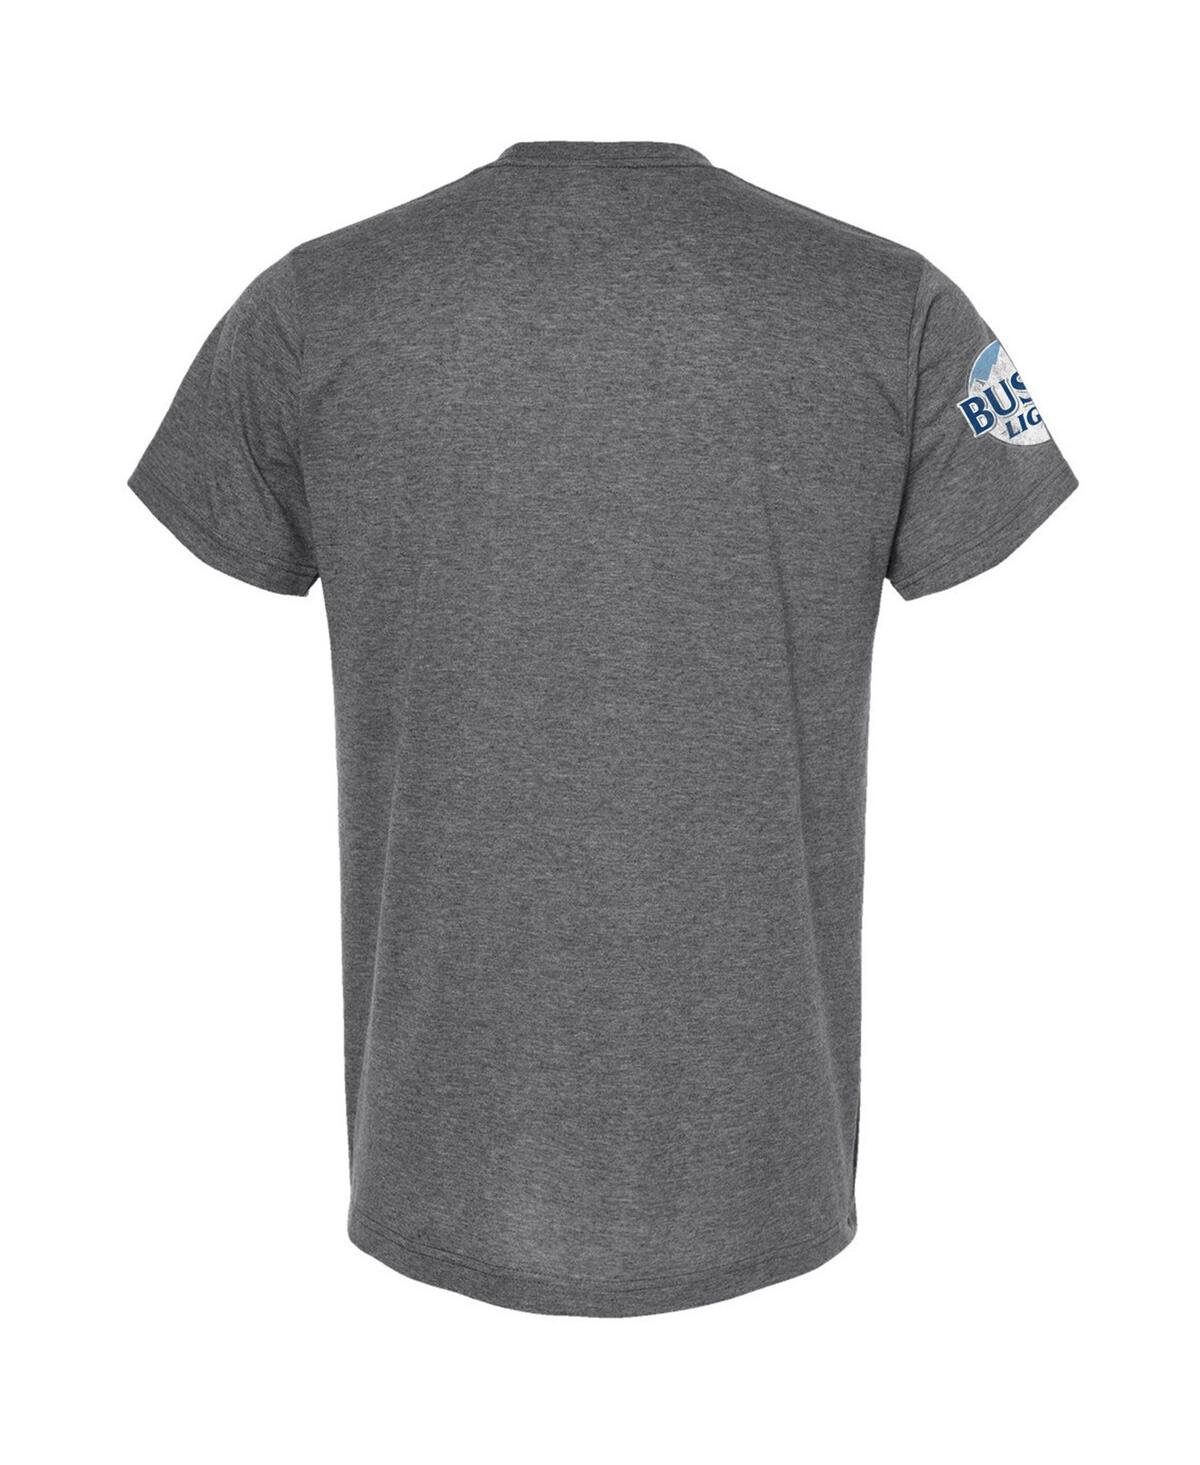 Shop Trackhouse Racing Team Collection Men's  Heather Charcoal Ross Chastain Pole Sitter T-shirt